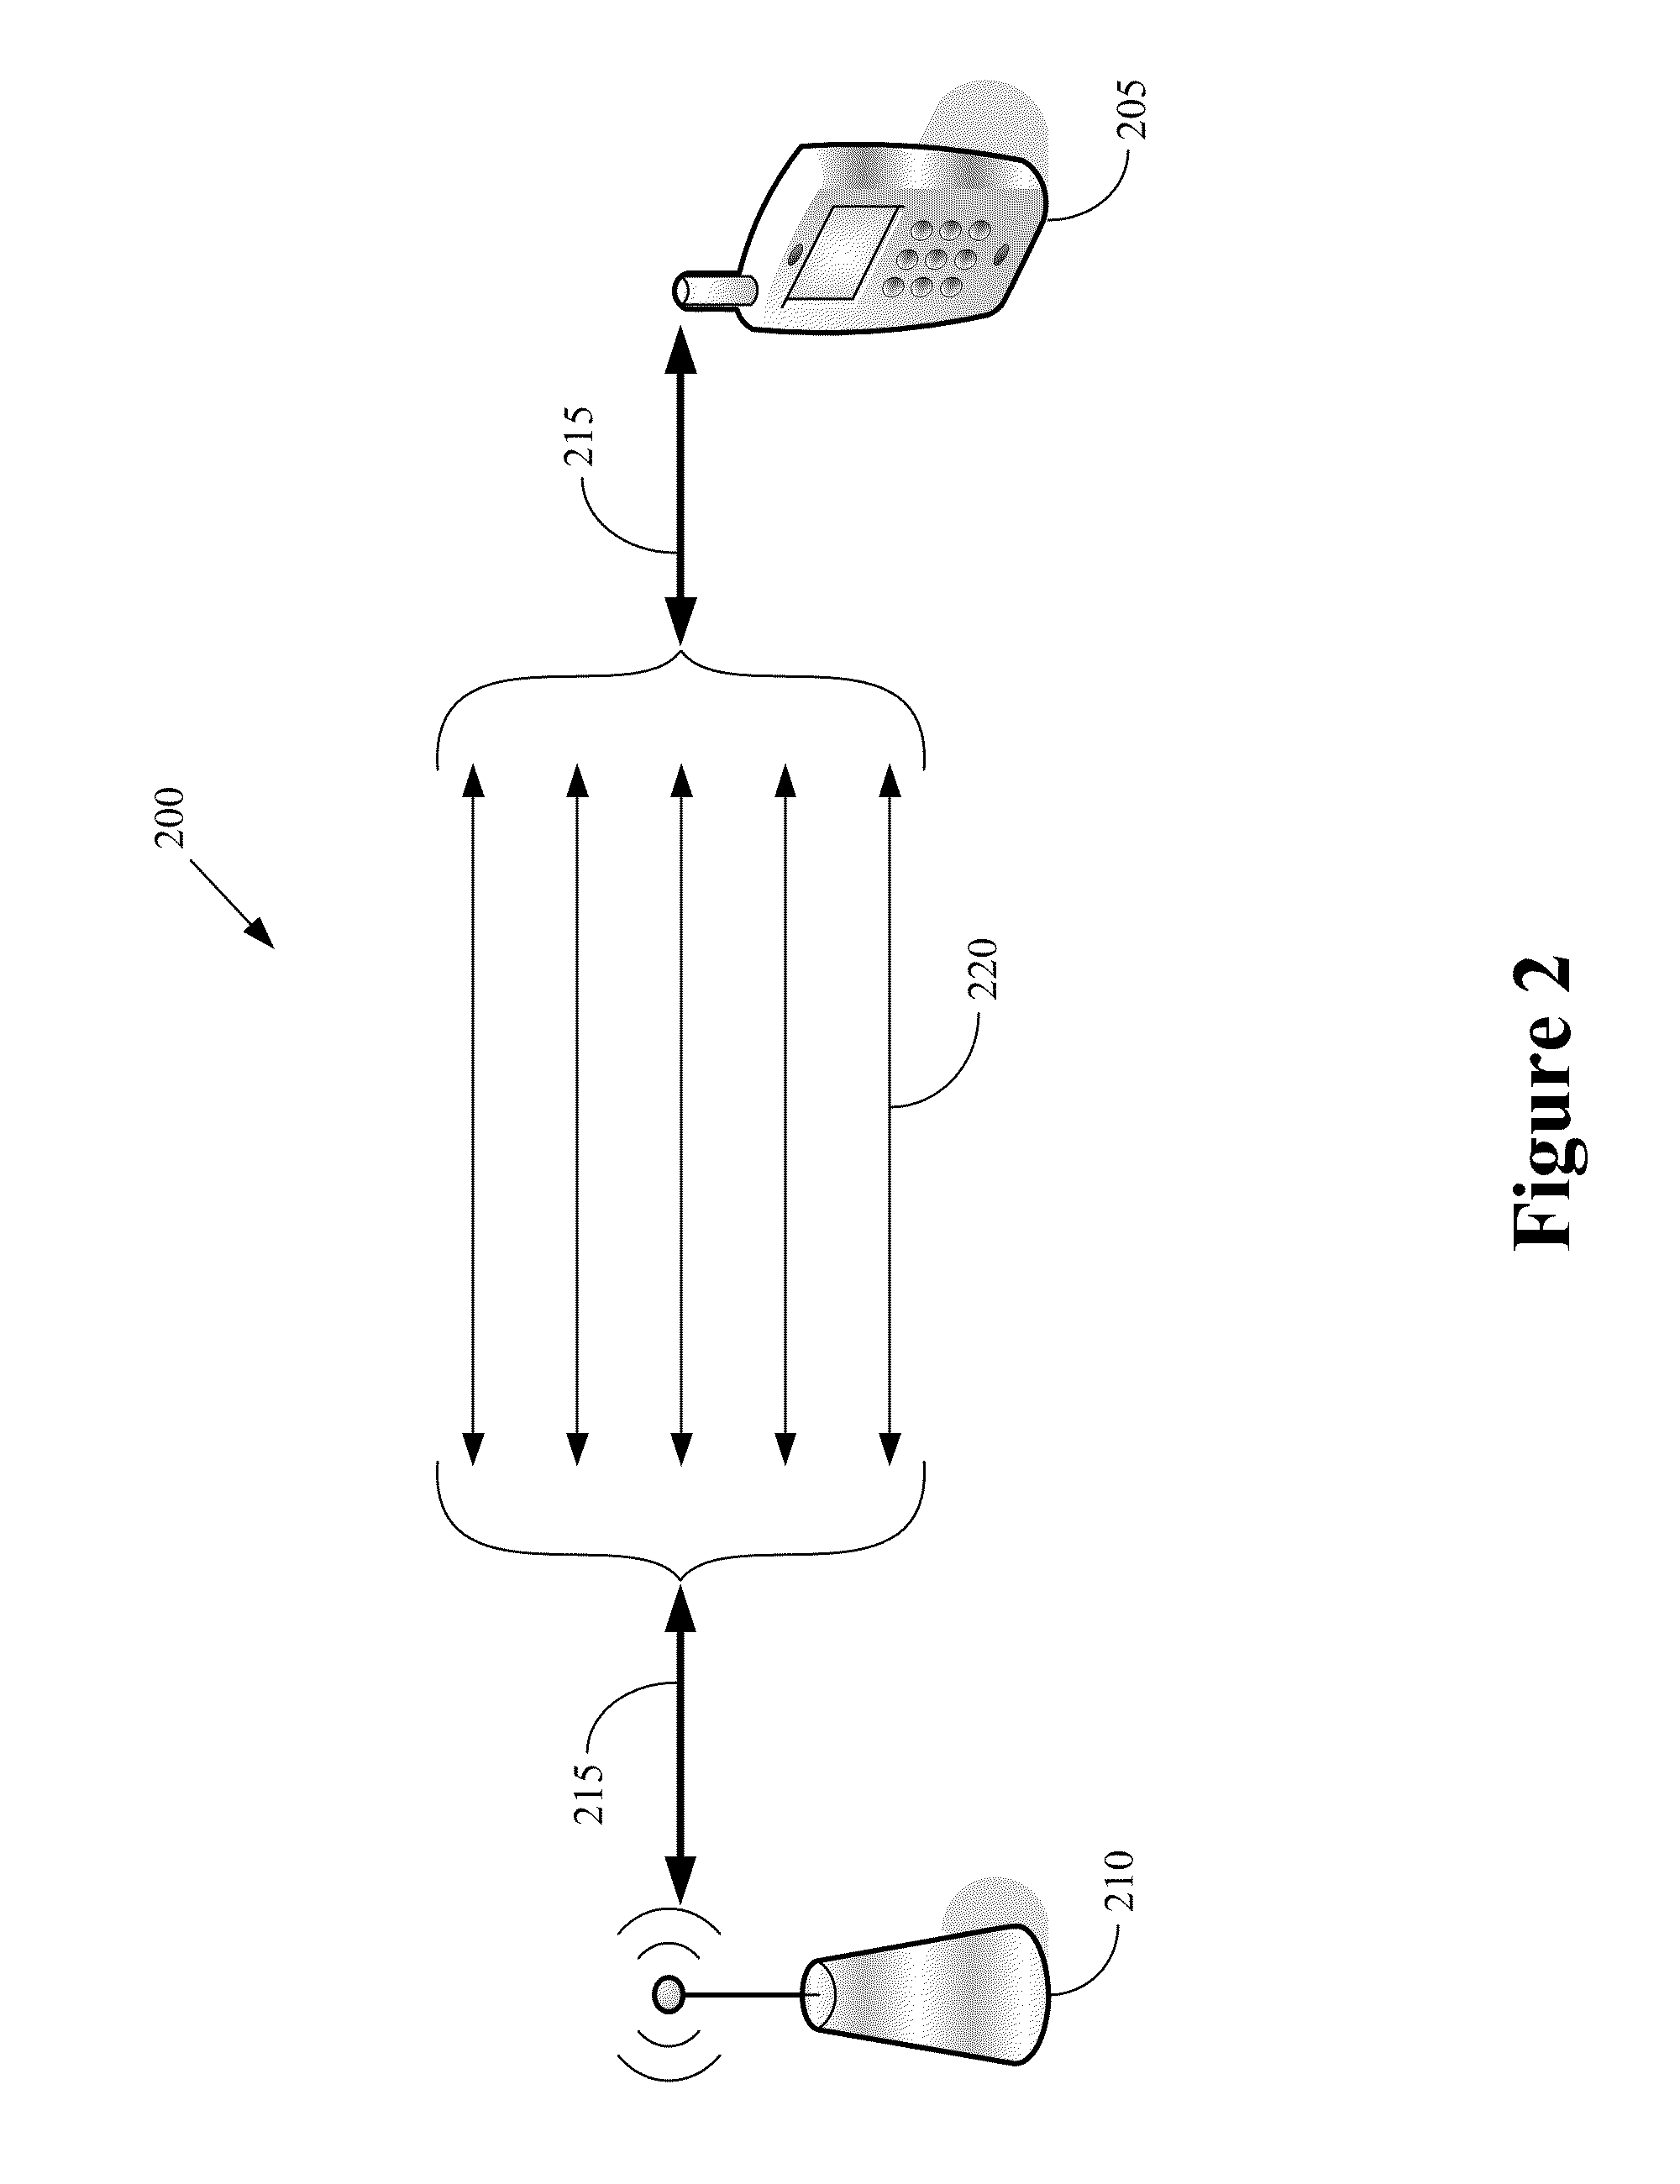 Indicating dynamic allocation of component carriers in multi-component carrier systems